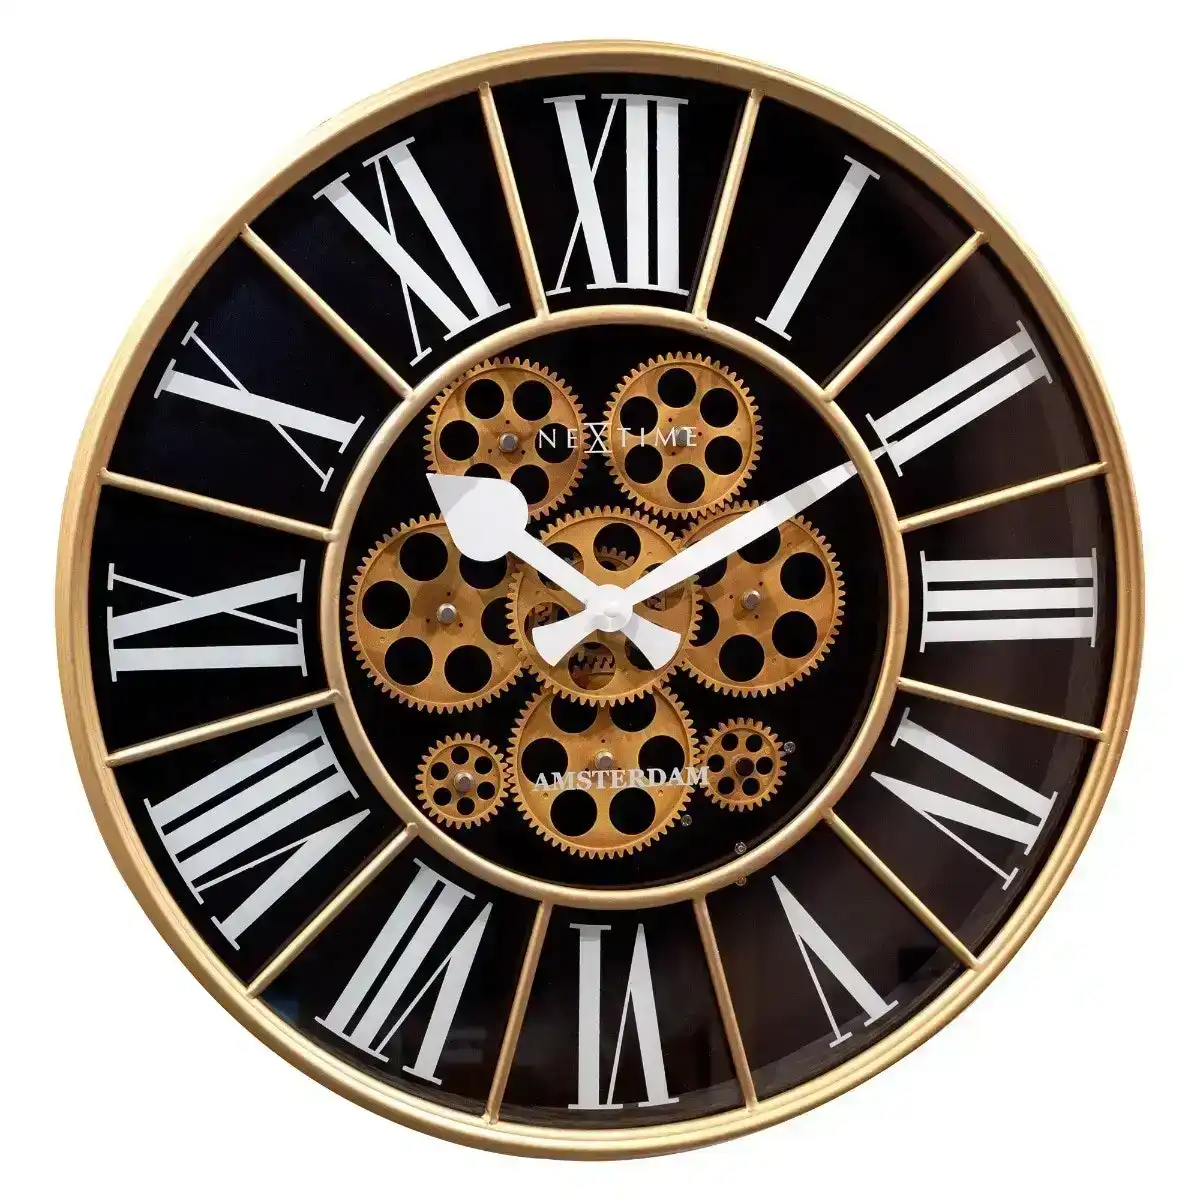 NeXtime William 50cm Hanging Wall Clock Round Analogue Home/Office Decor Black